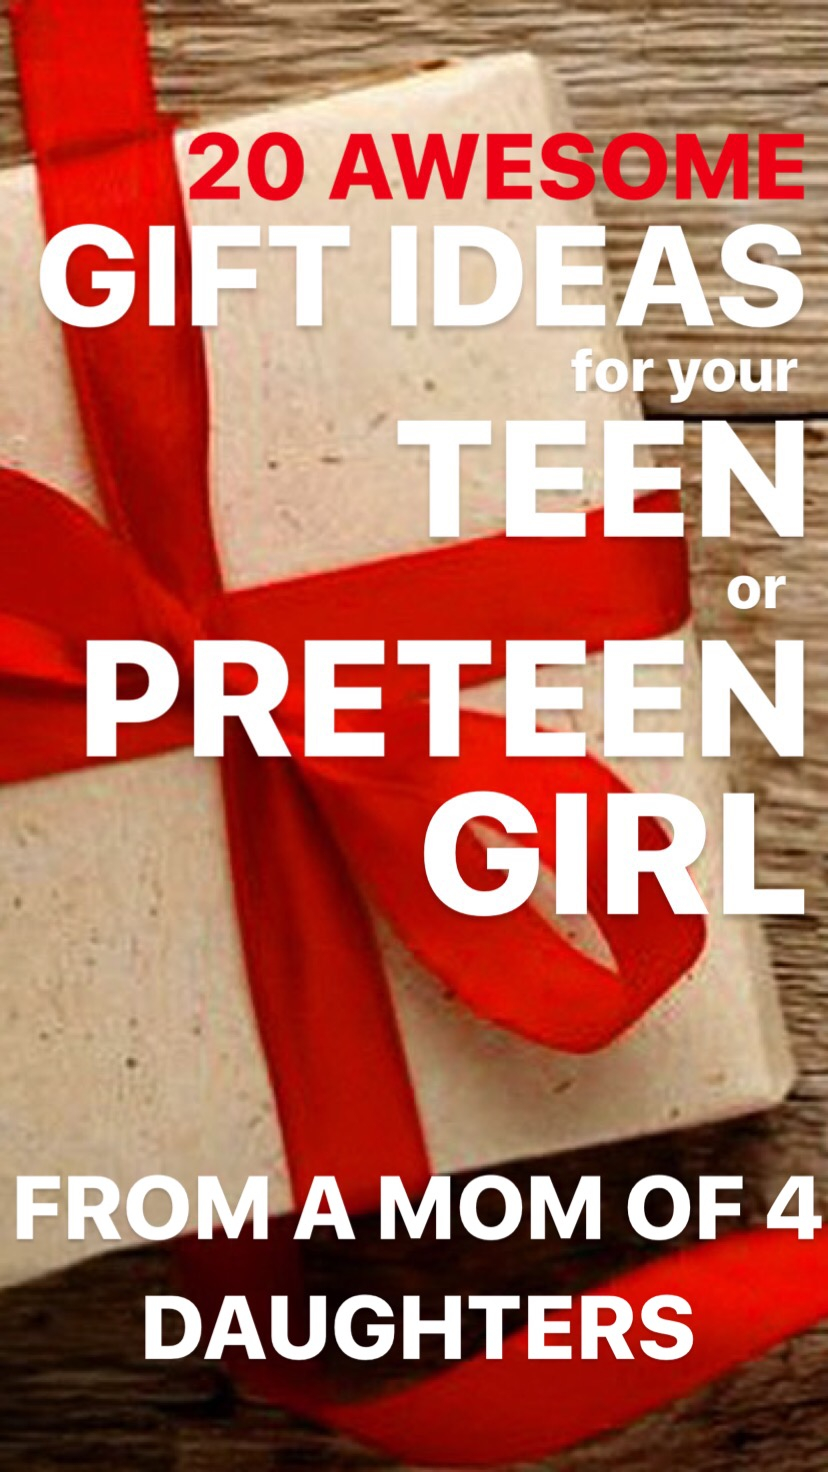 Birthday Card Ideas For Teenage Girl 20 Awesome Gift Ideas For Your Teen Or Preteen Girl From The Mom Of